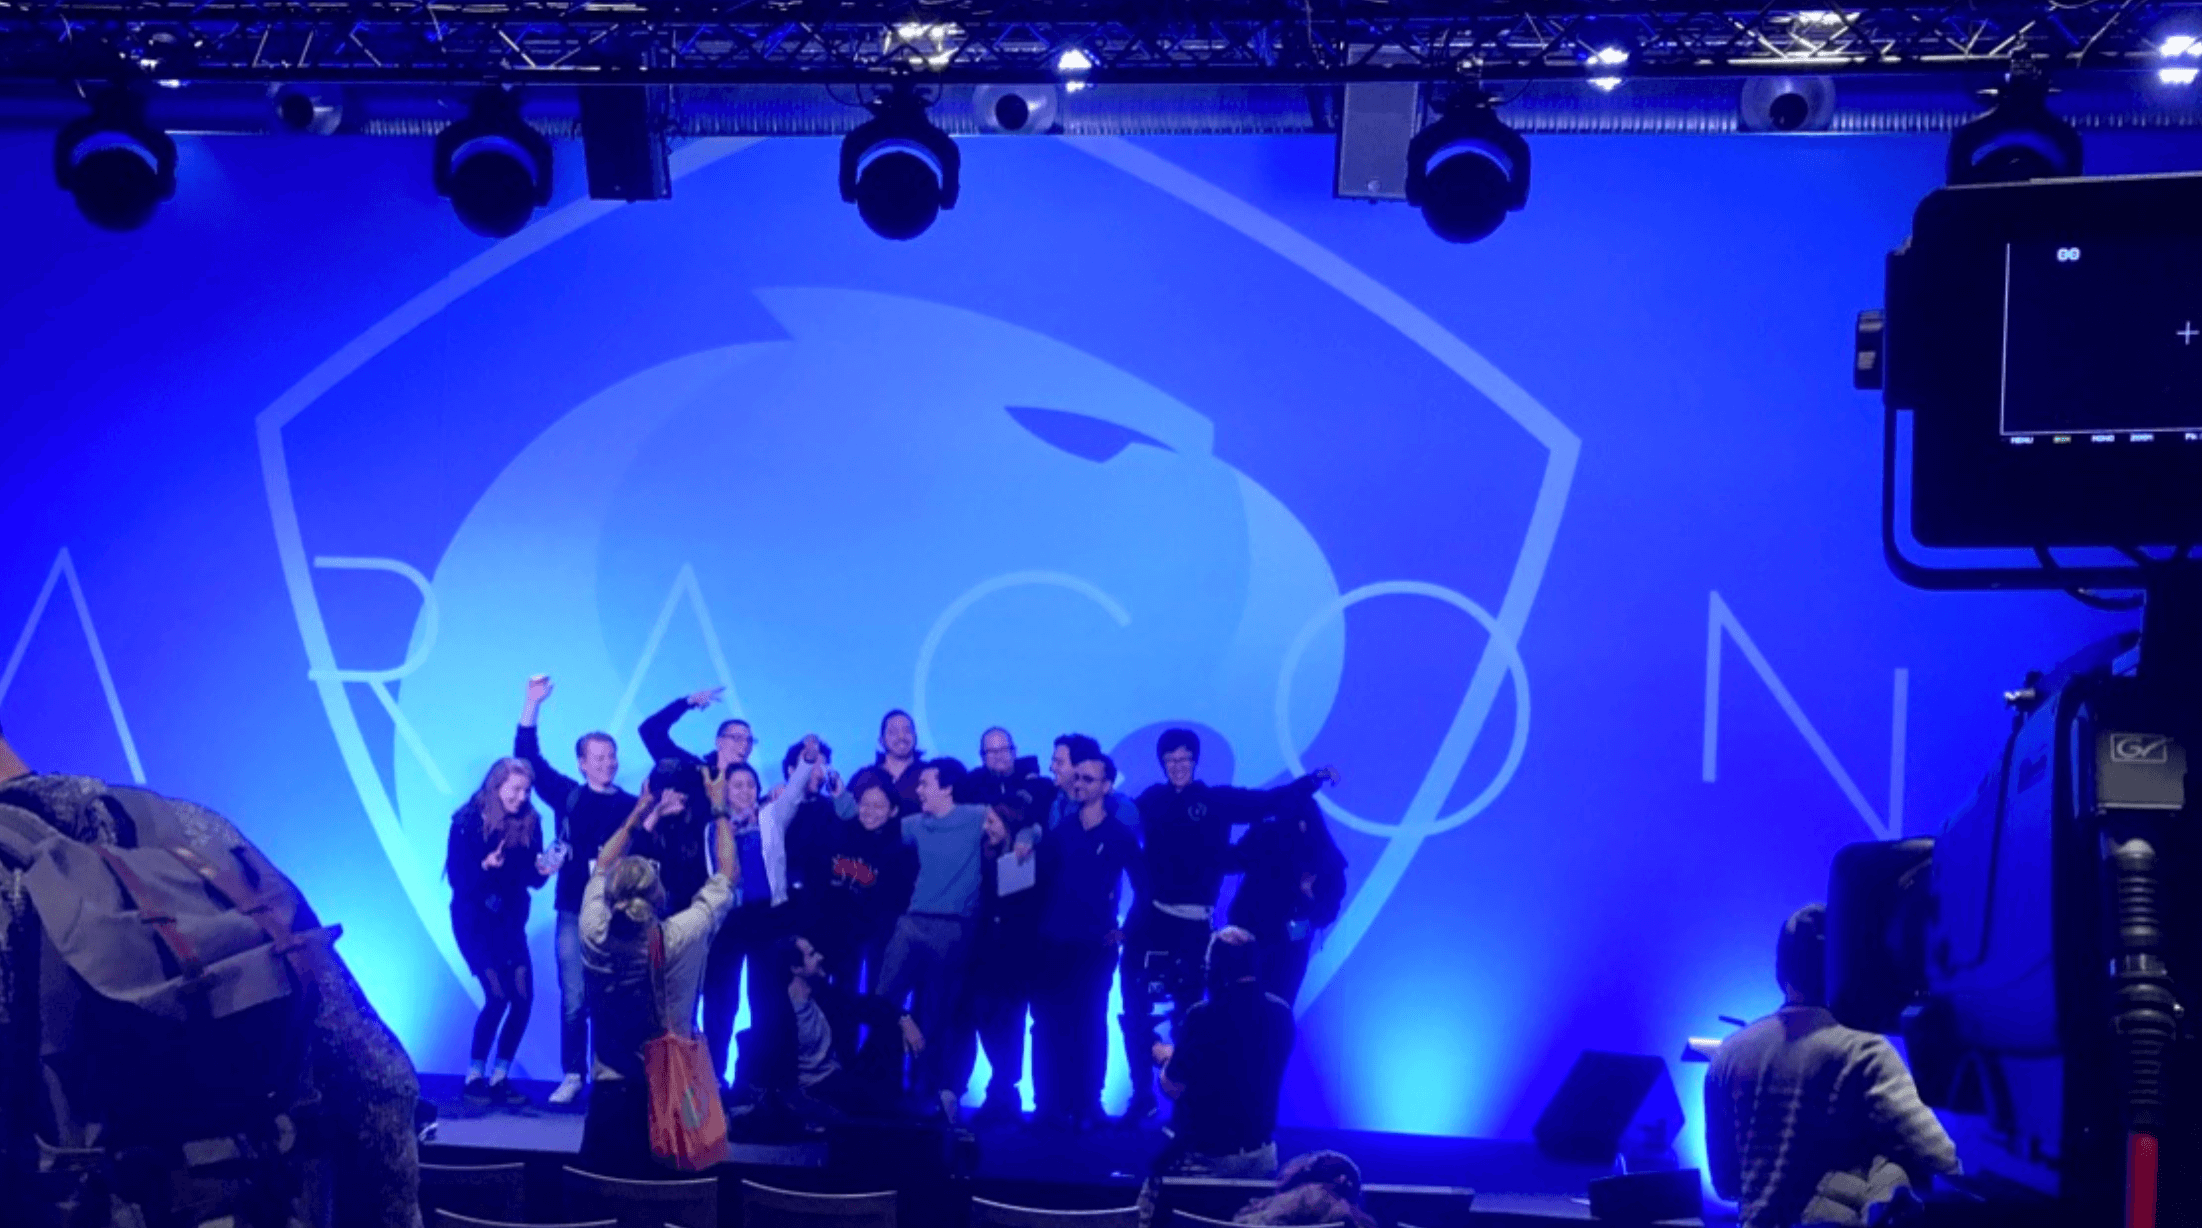 Well deserved cheering of Aracon.ONE team at the end of 2 days intense conferencing.